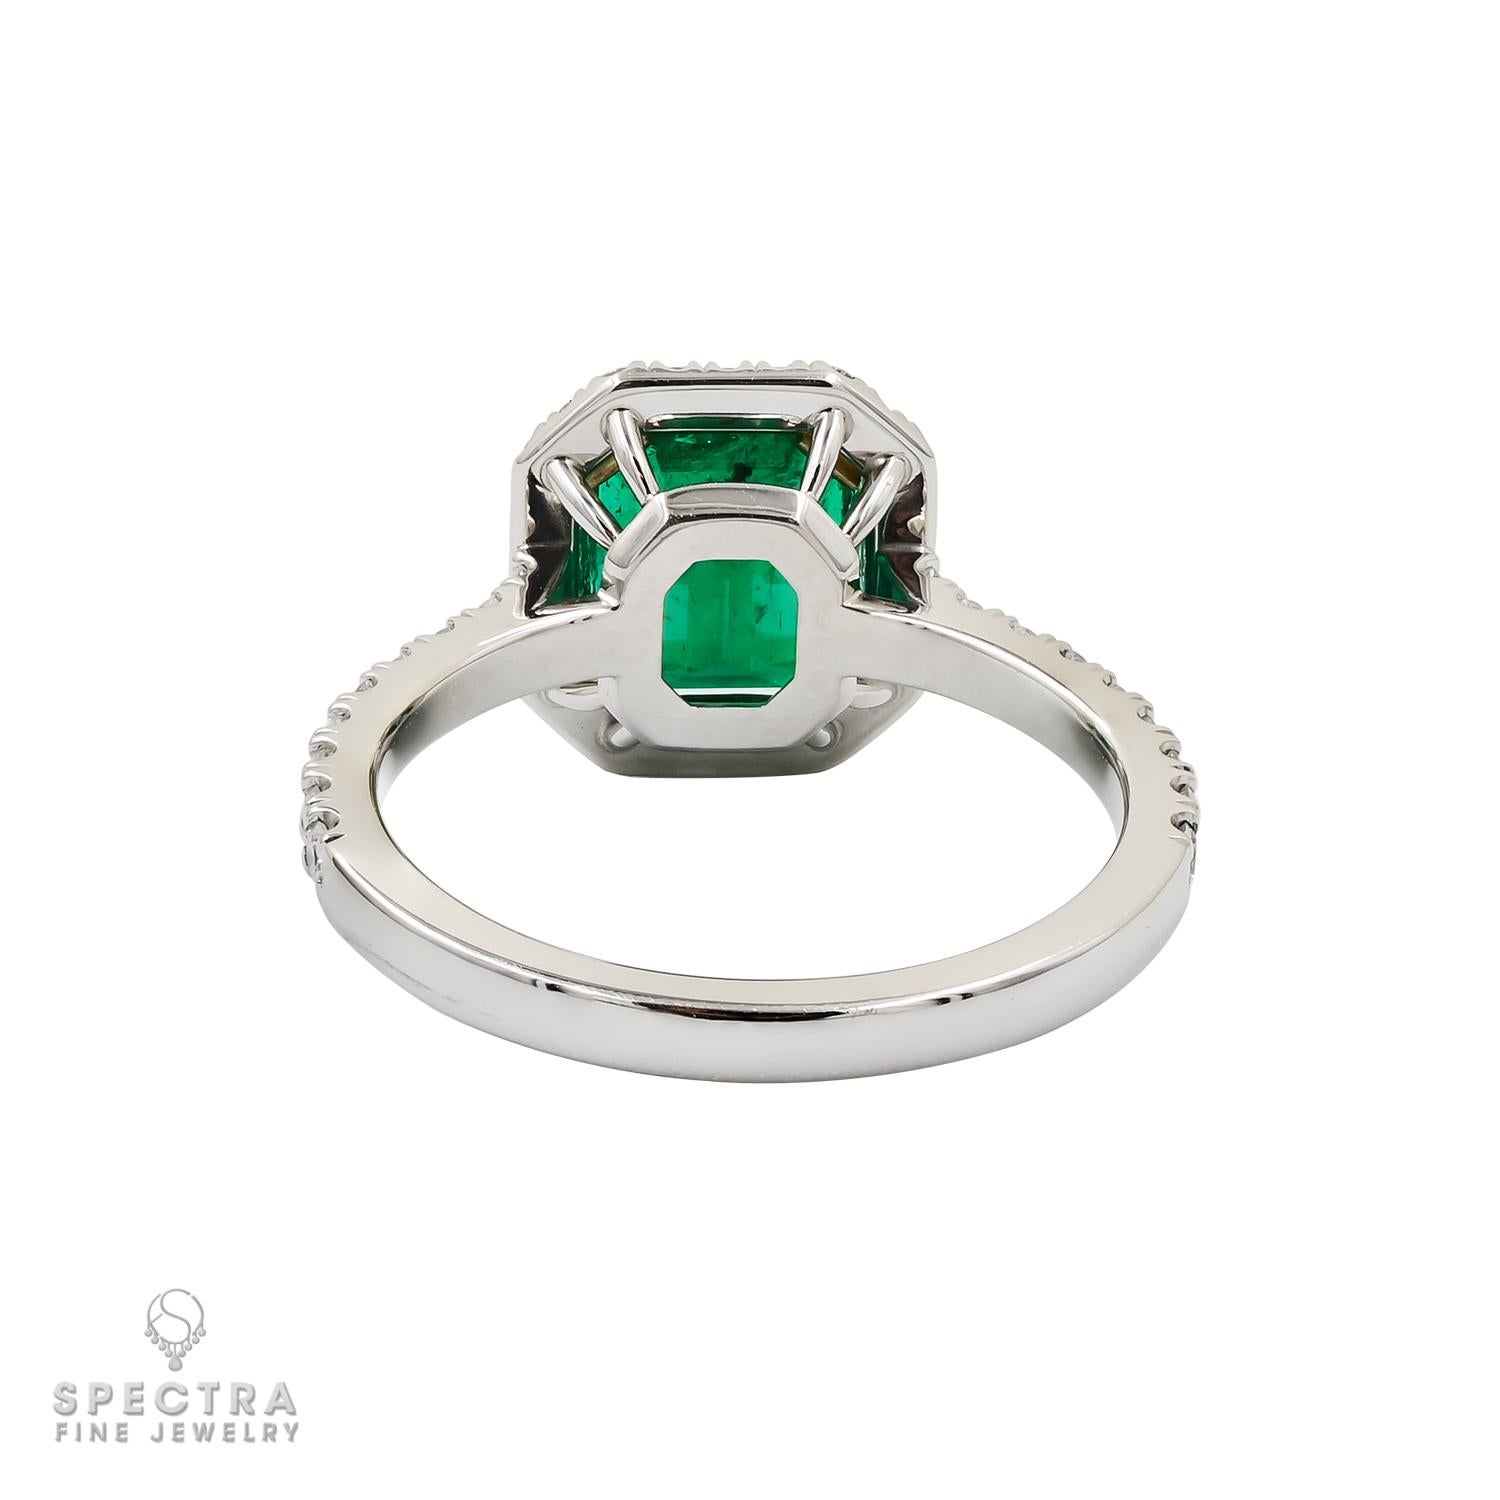 Contemporary Spectra Fine Jewelry GRS Certified 1.92 Carat Colombian Emerald Diamond Ring For Sale